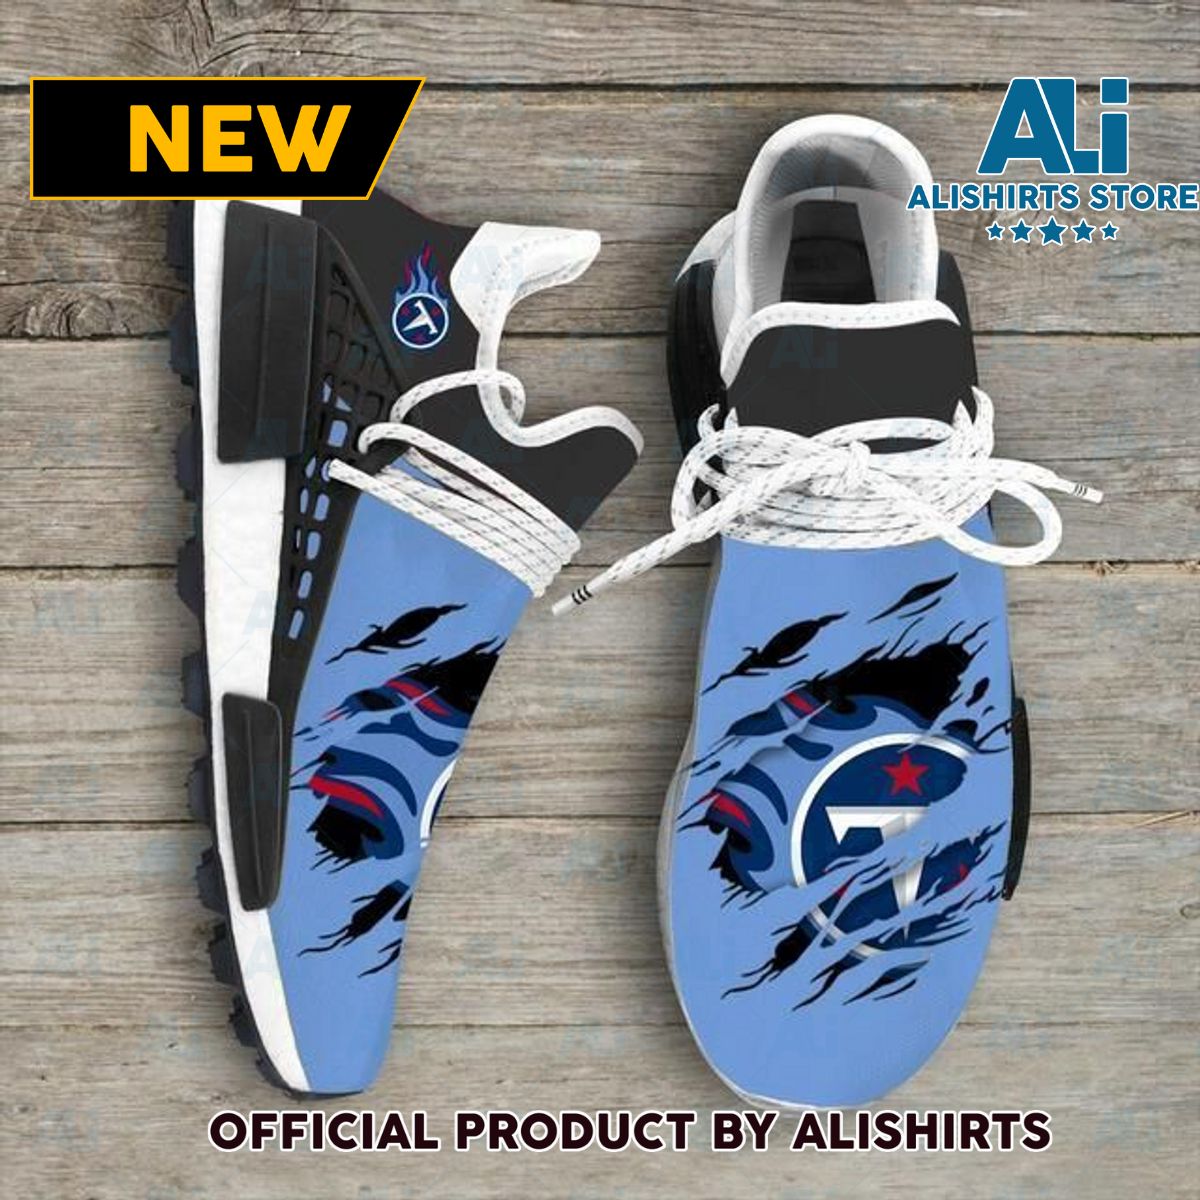 Tennessee Titans Nfl NMD Human Race shoes Customized Adidas NMD Sneakers